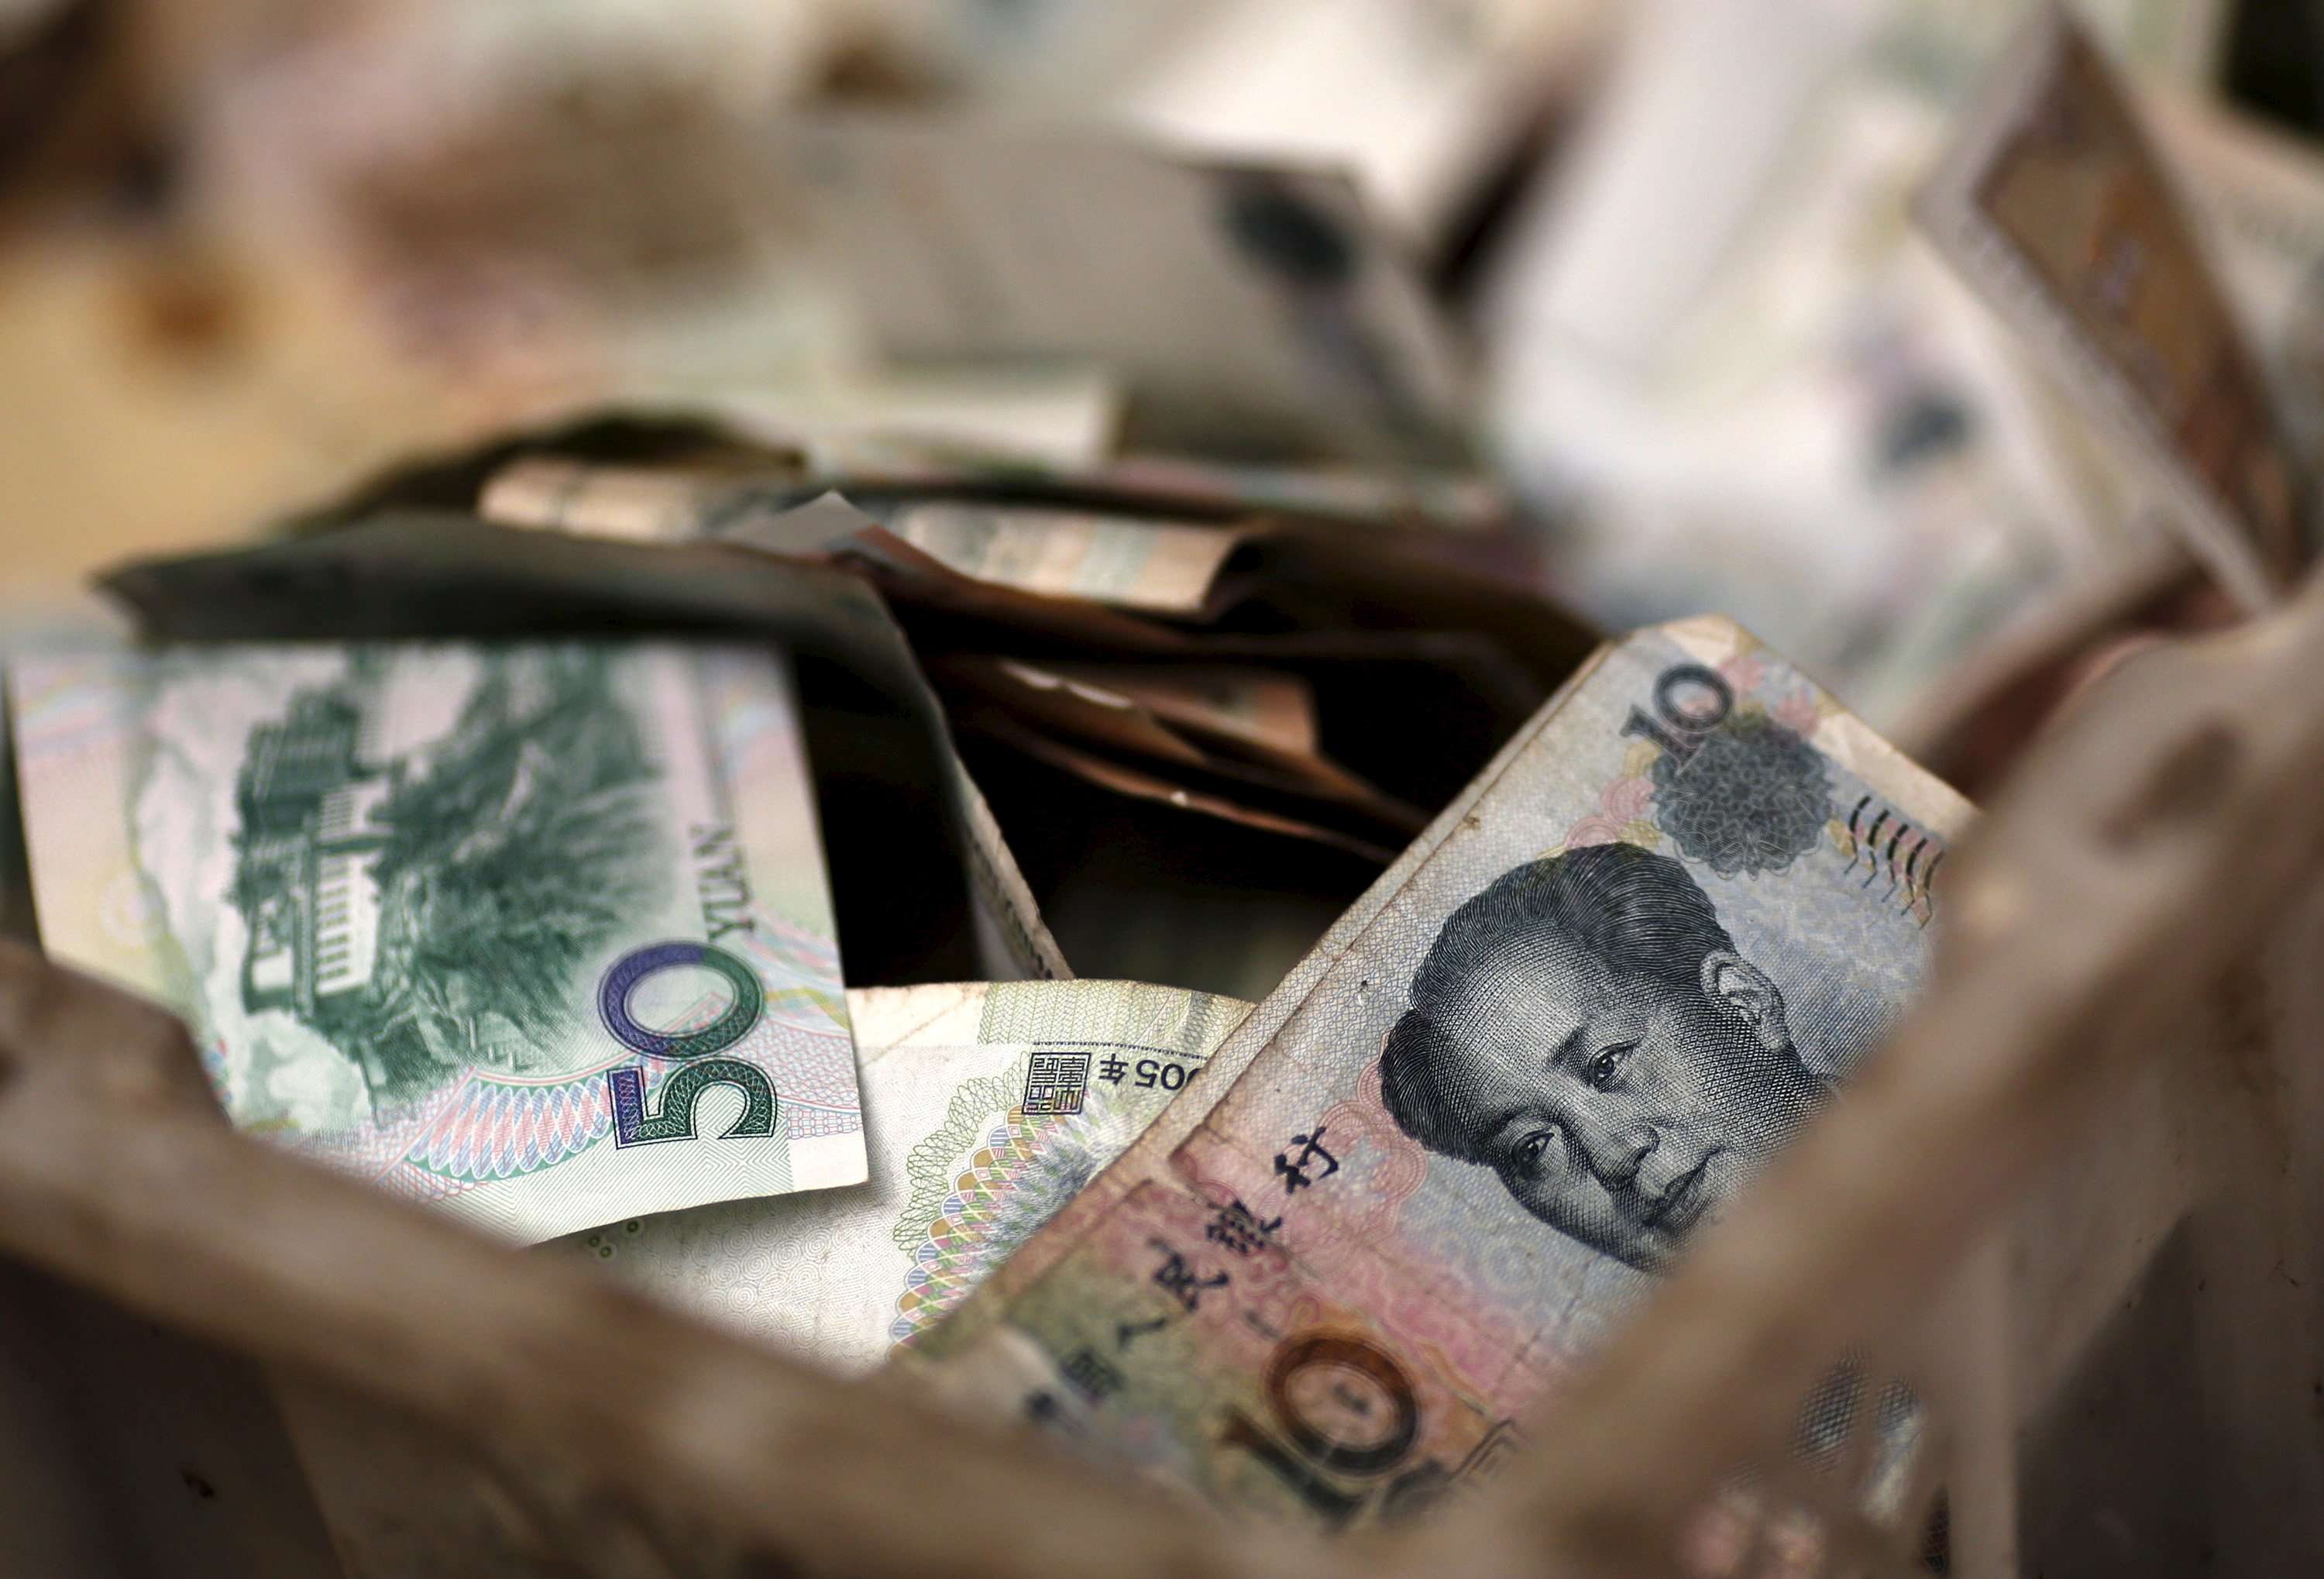 Chinese banknotes are seen in a vendor's cash box at a market in Beijing. China’s renminbi is closer to joining the major league of reserve currencies with a deal to include it in the International Monetary Fund's unit of account. Photo: Reuters